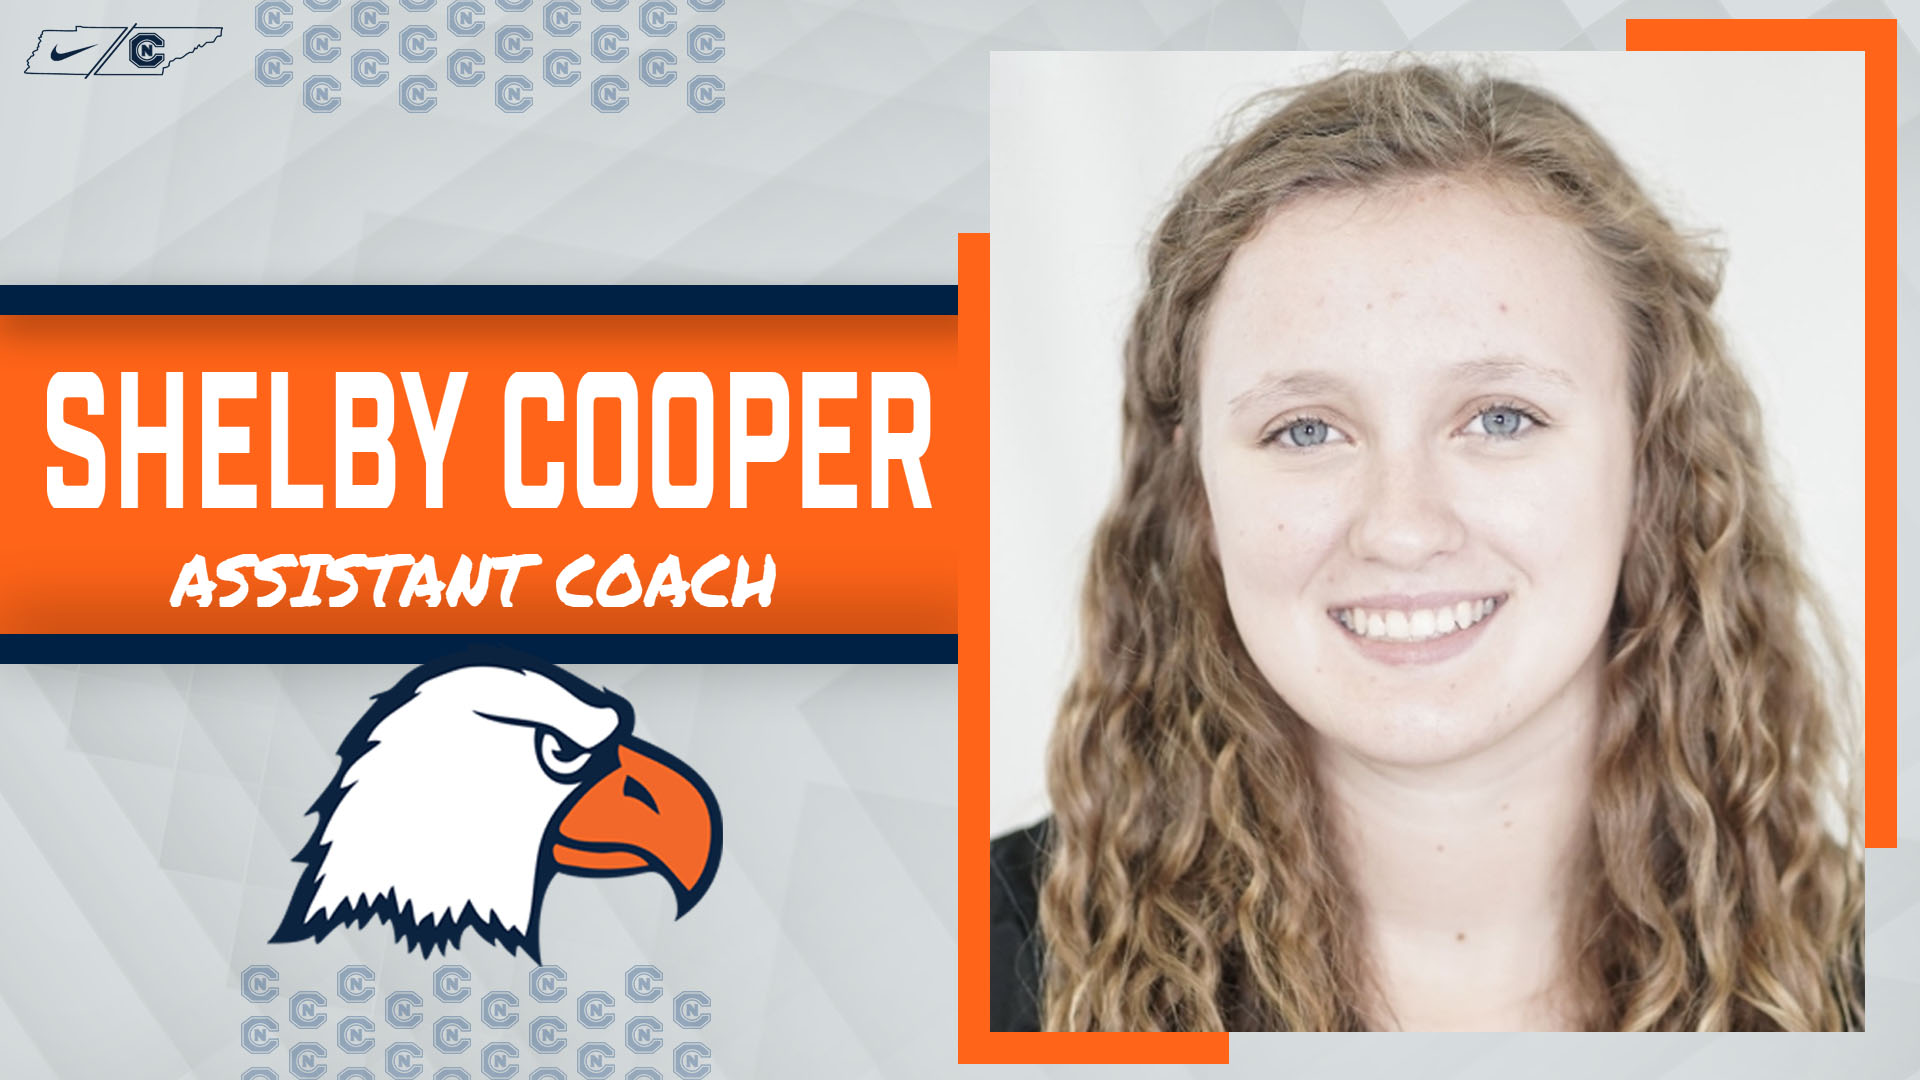 Cooper joins volleyball coaching staffs